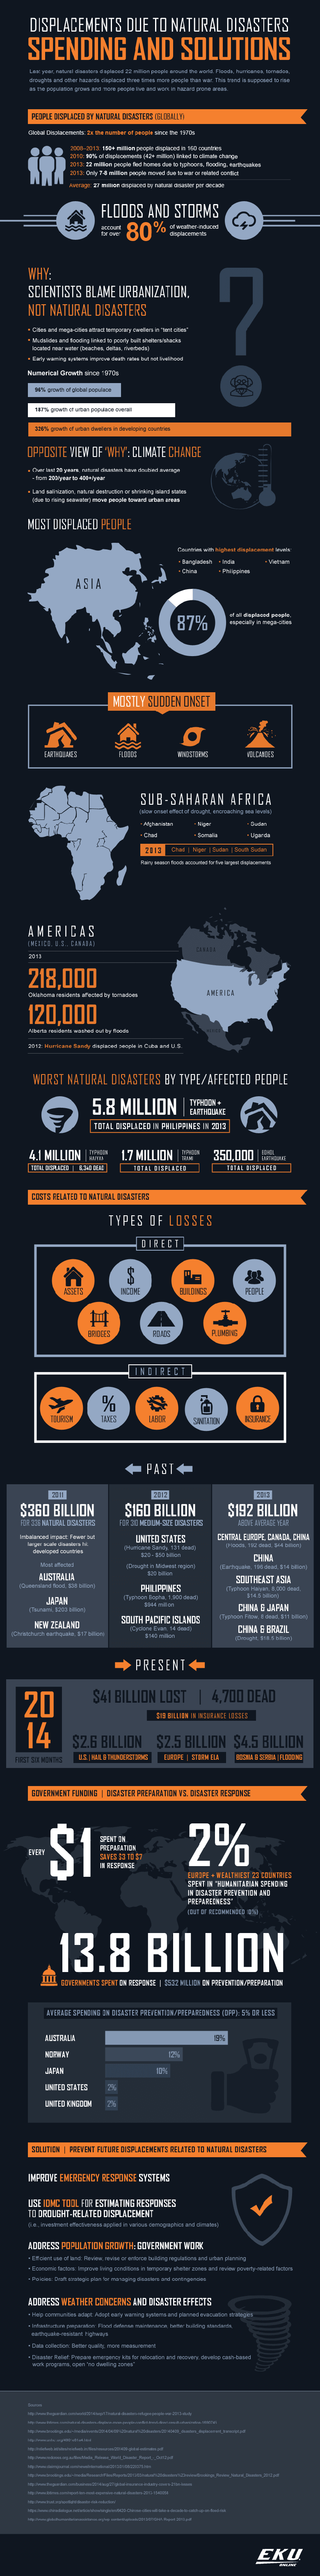 Displacements due to natural disasters - Infographic